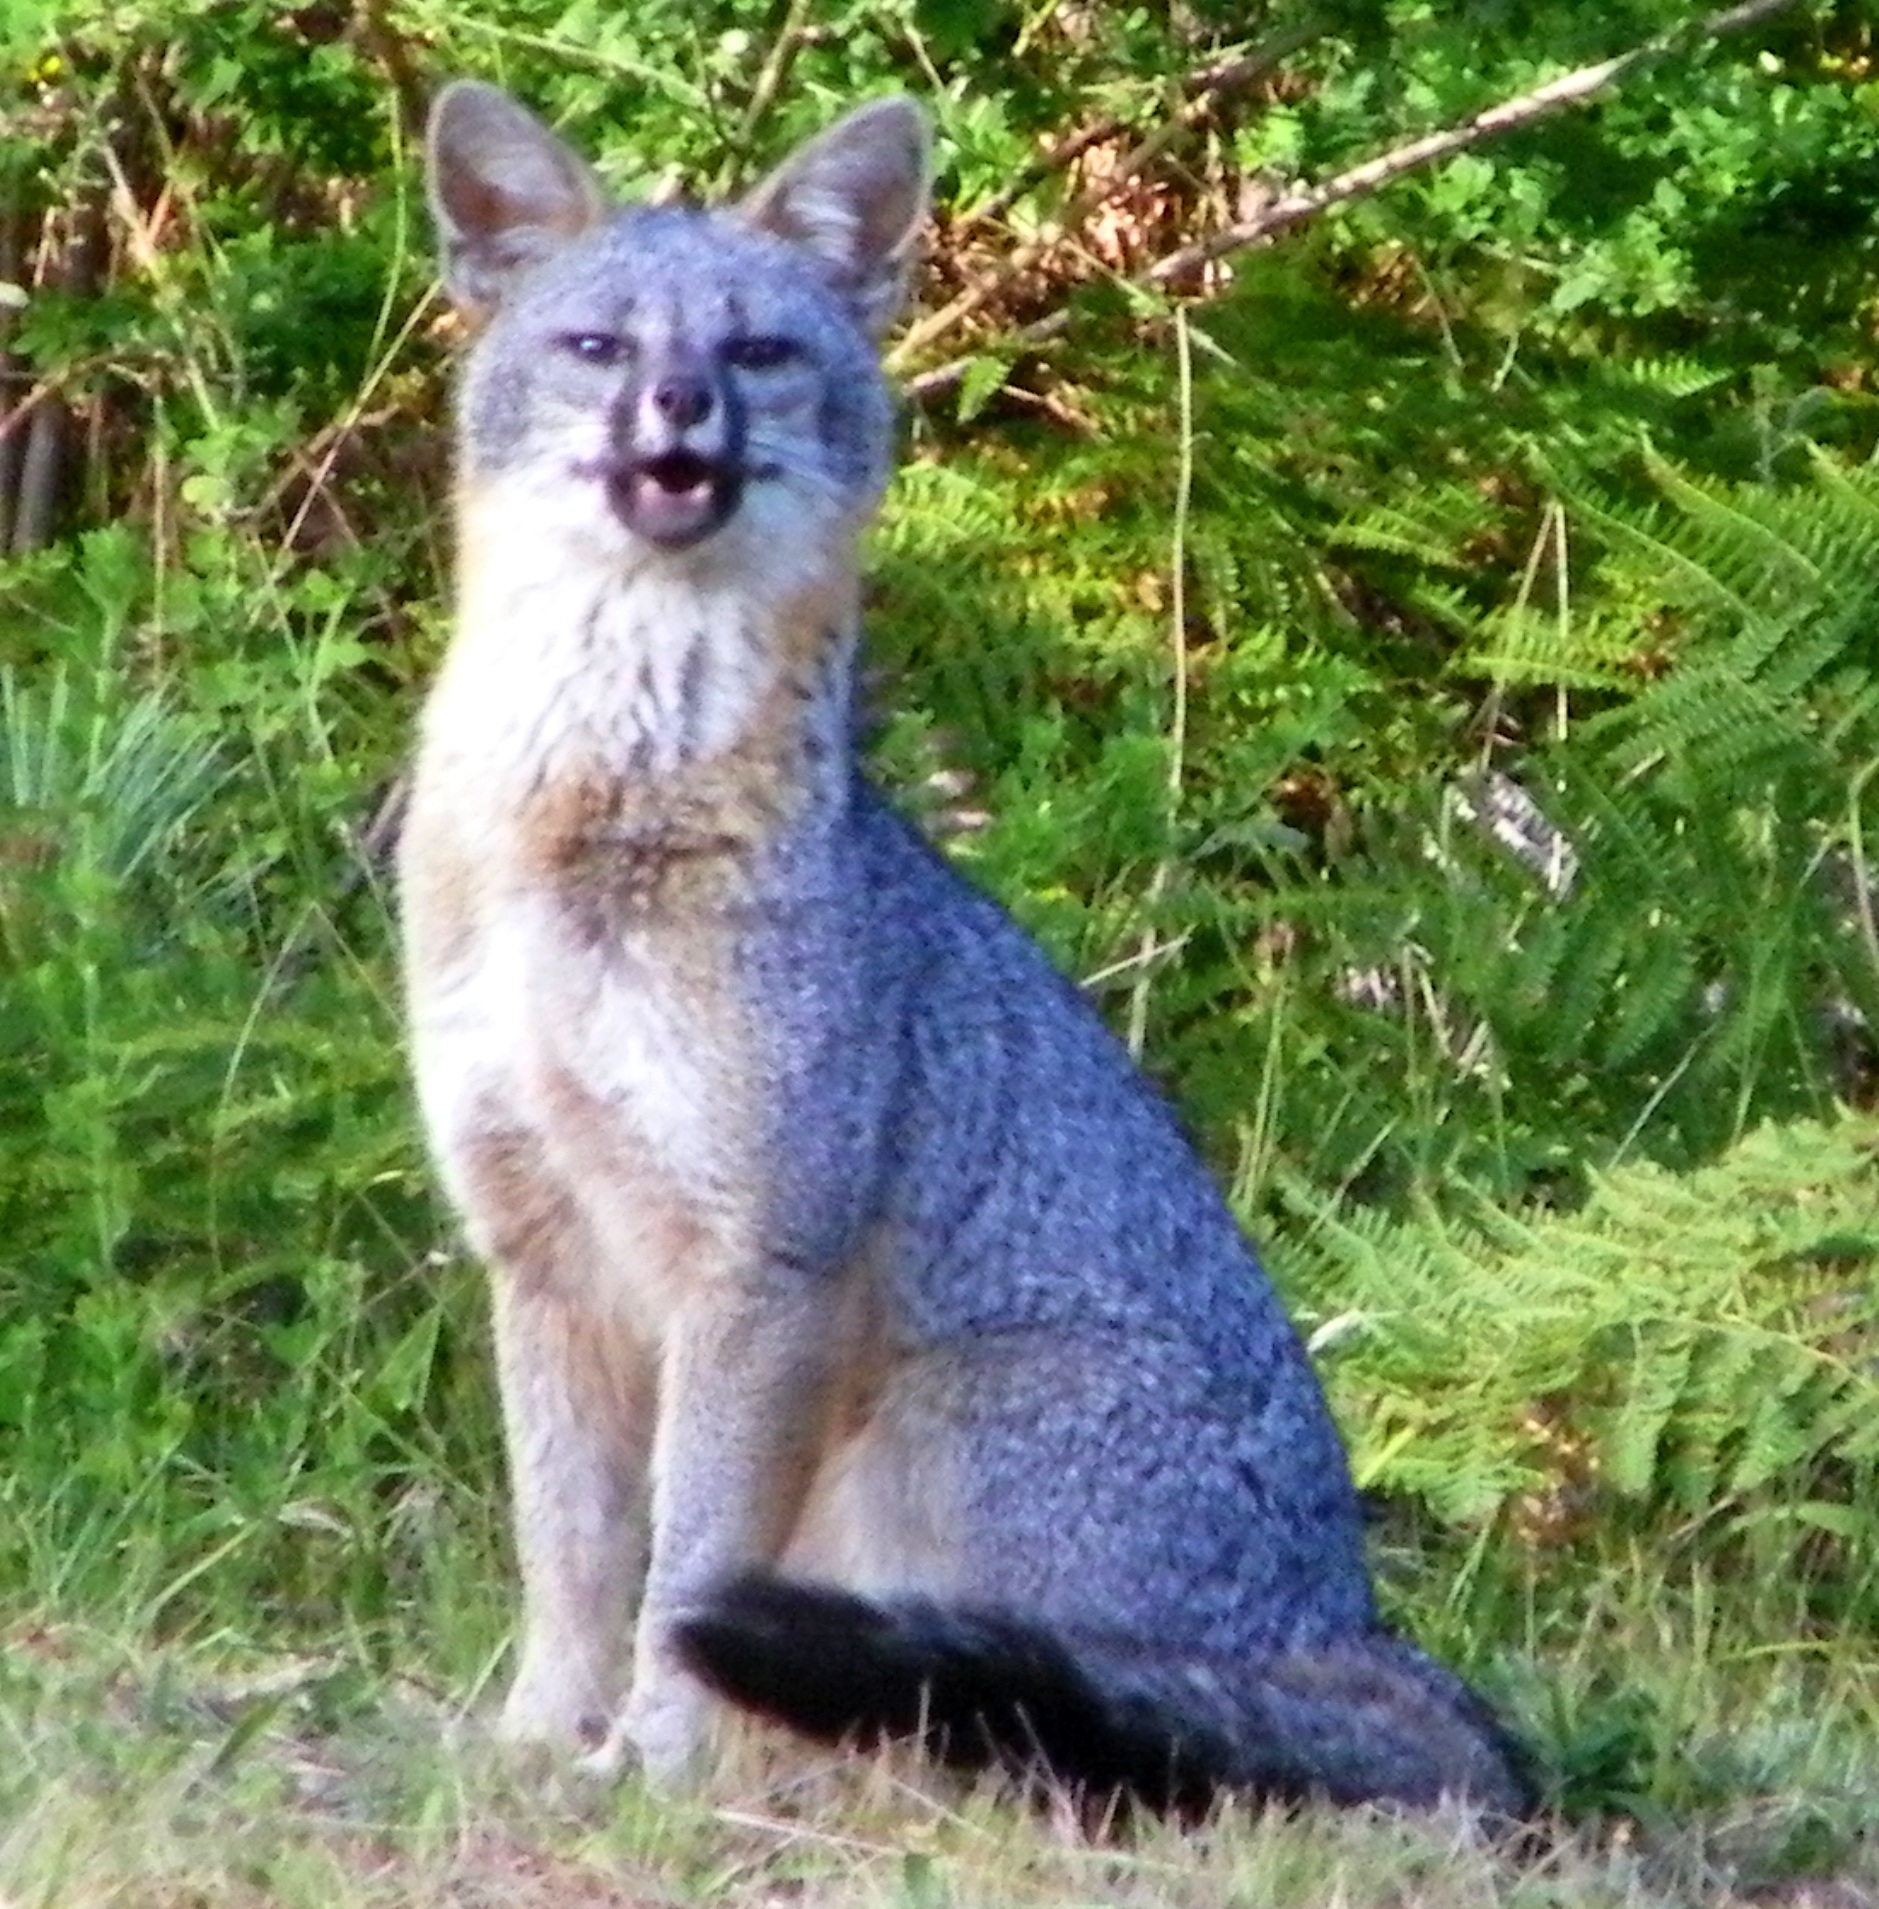 Gray Fox kits have made a welcome appearance on the Mendonoma Coast ...